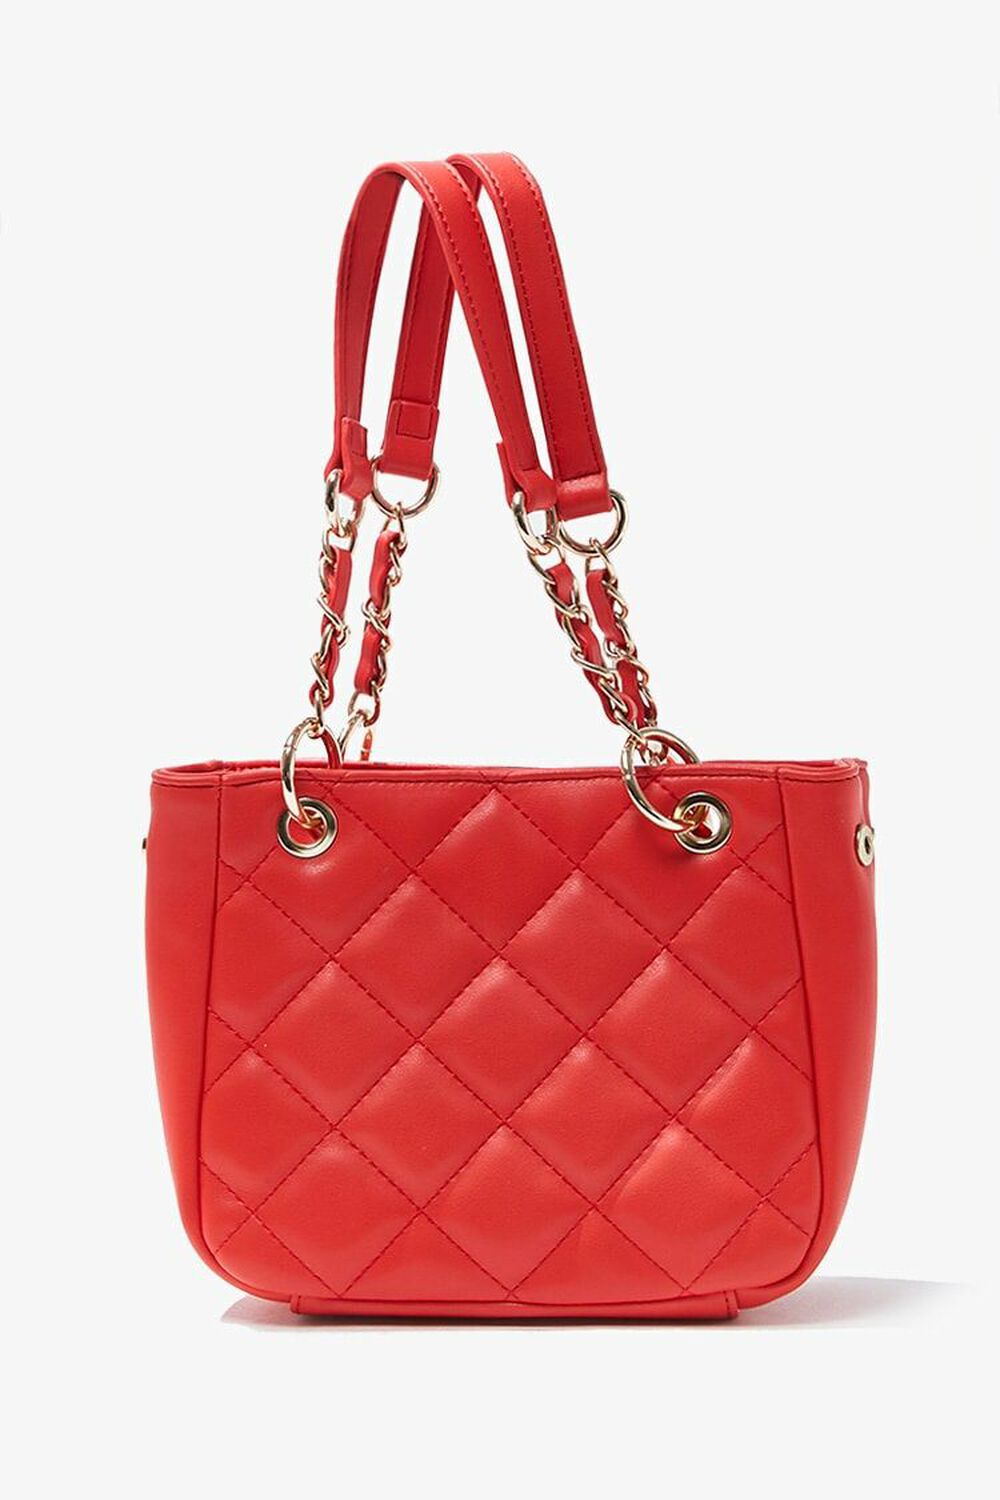 RED Mini Quilted Tote Bag, image 1